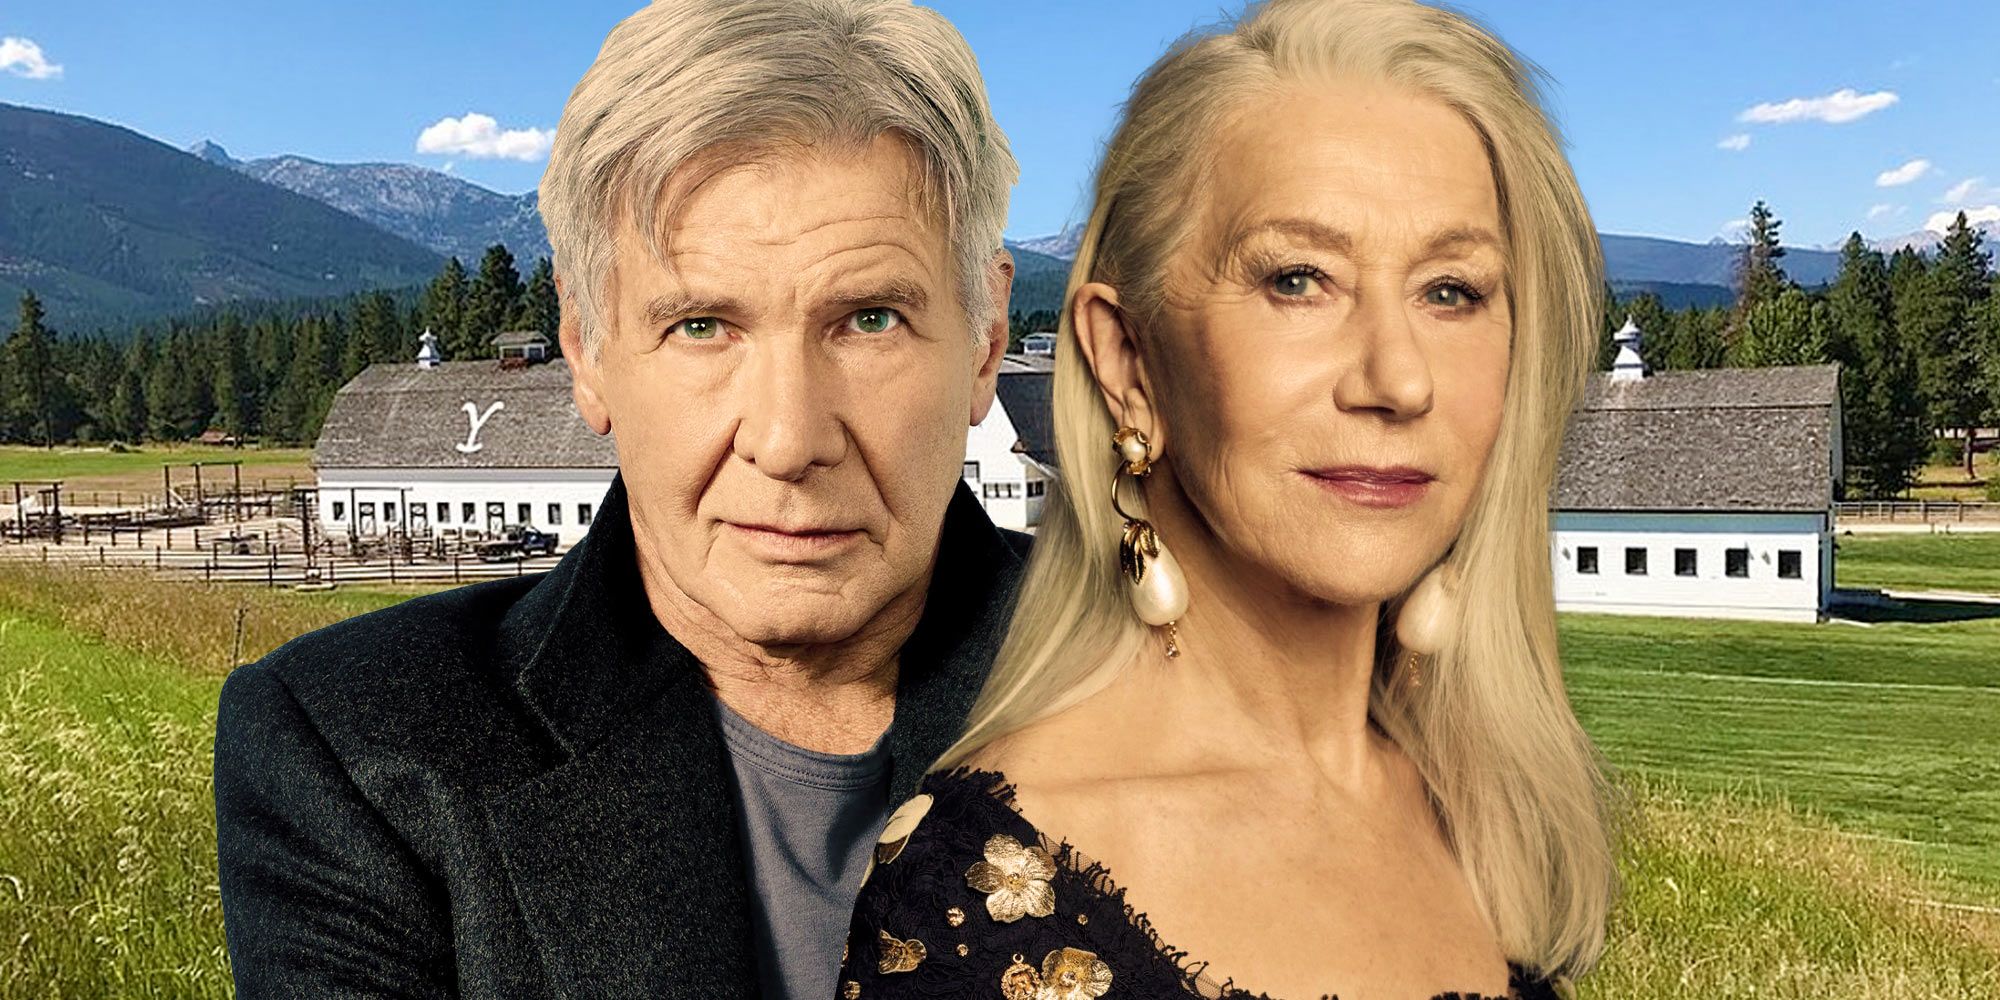 1923 title change for yellowstone spinoff with harrison ford and helen mirren